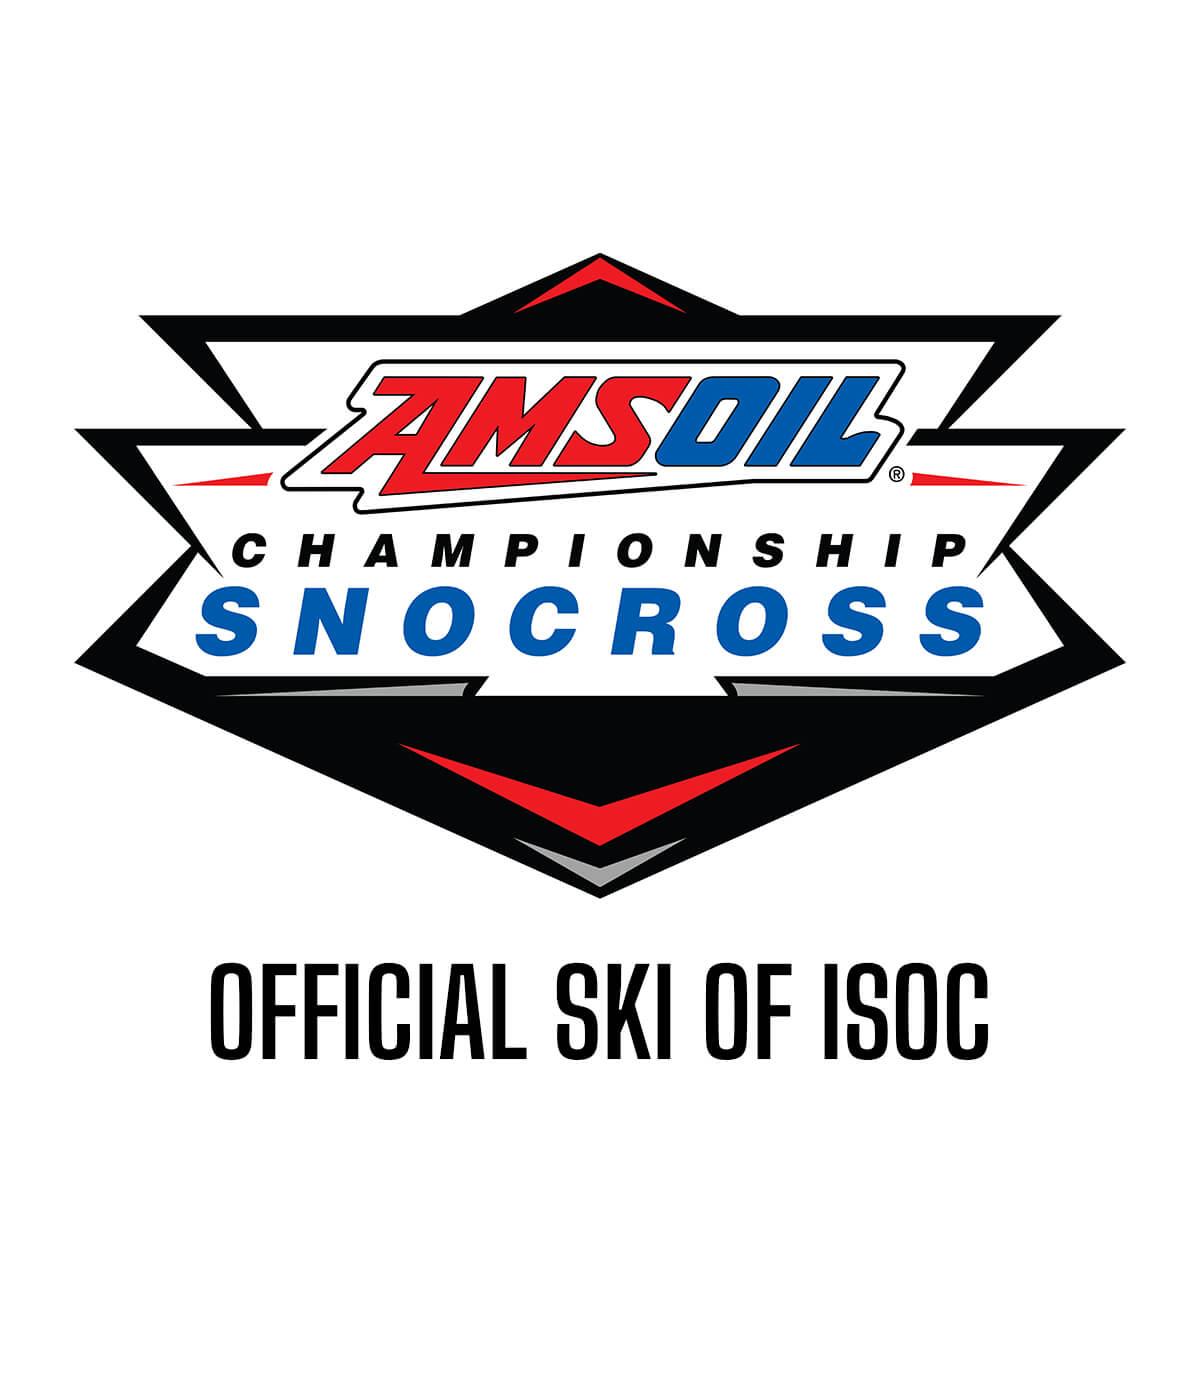 Amsoil Championship Snocross logo with text "Official Ski of ISOC"